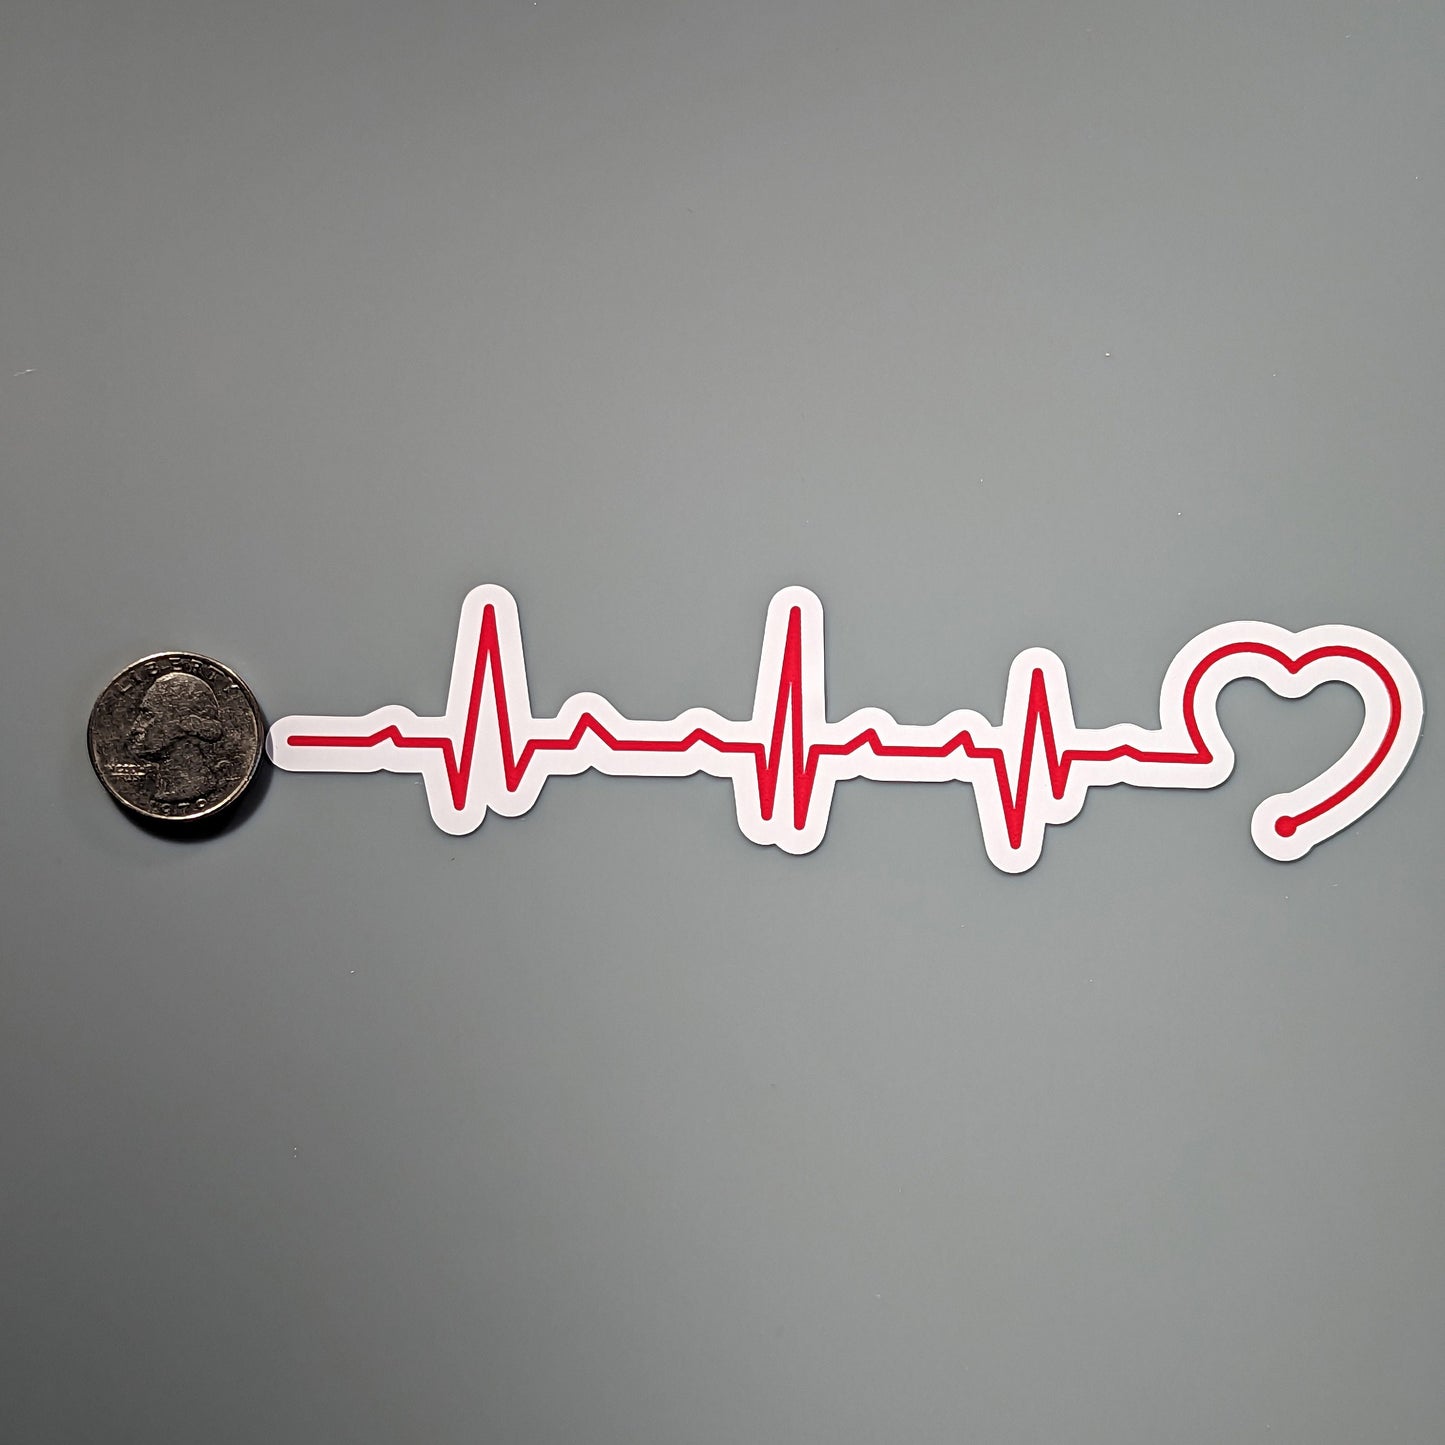 Heartbeat Decal